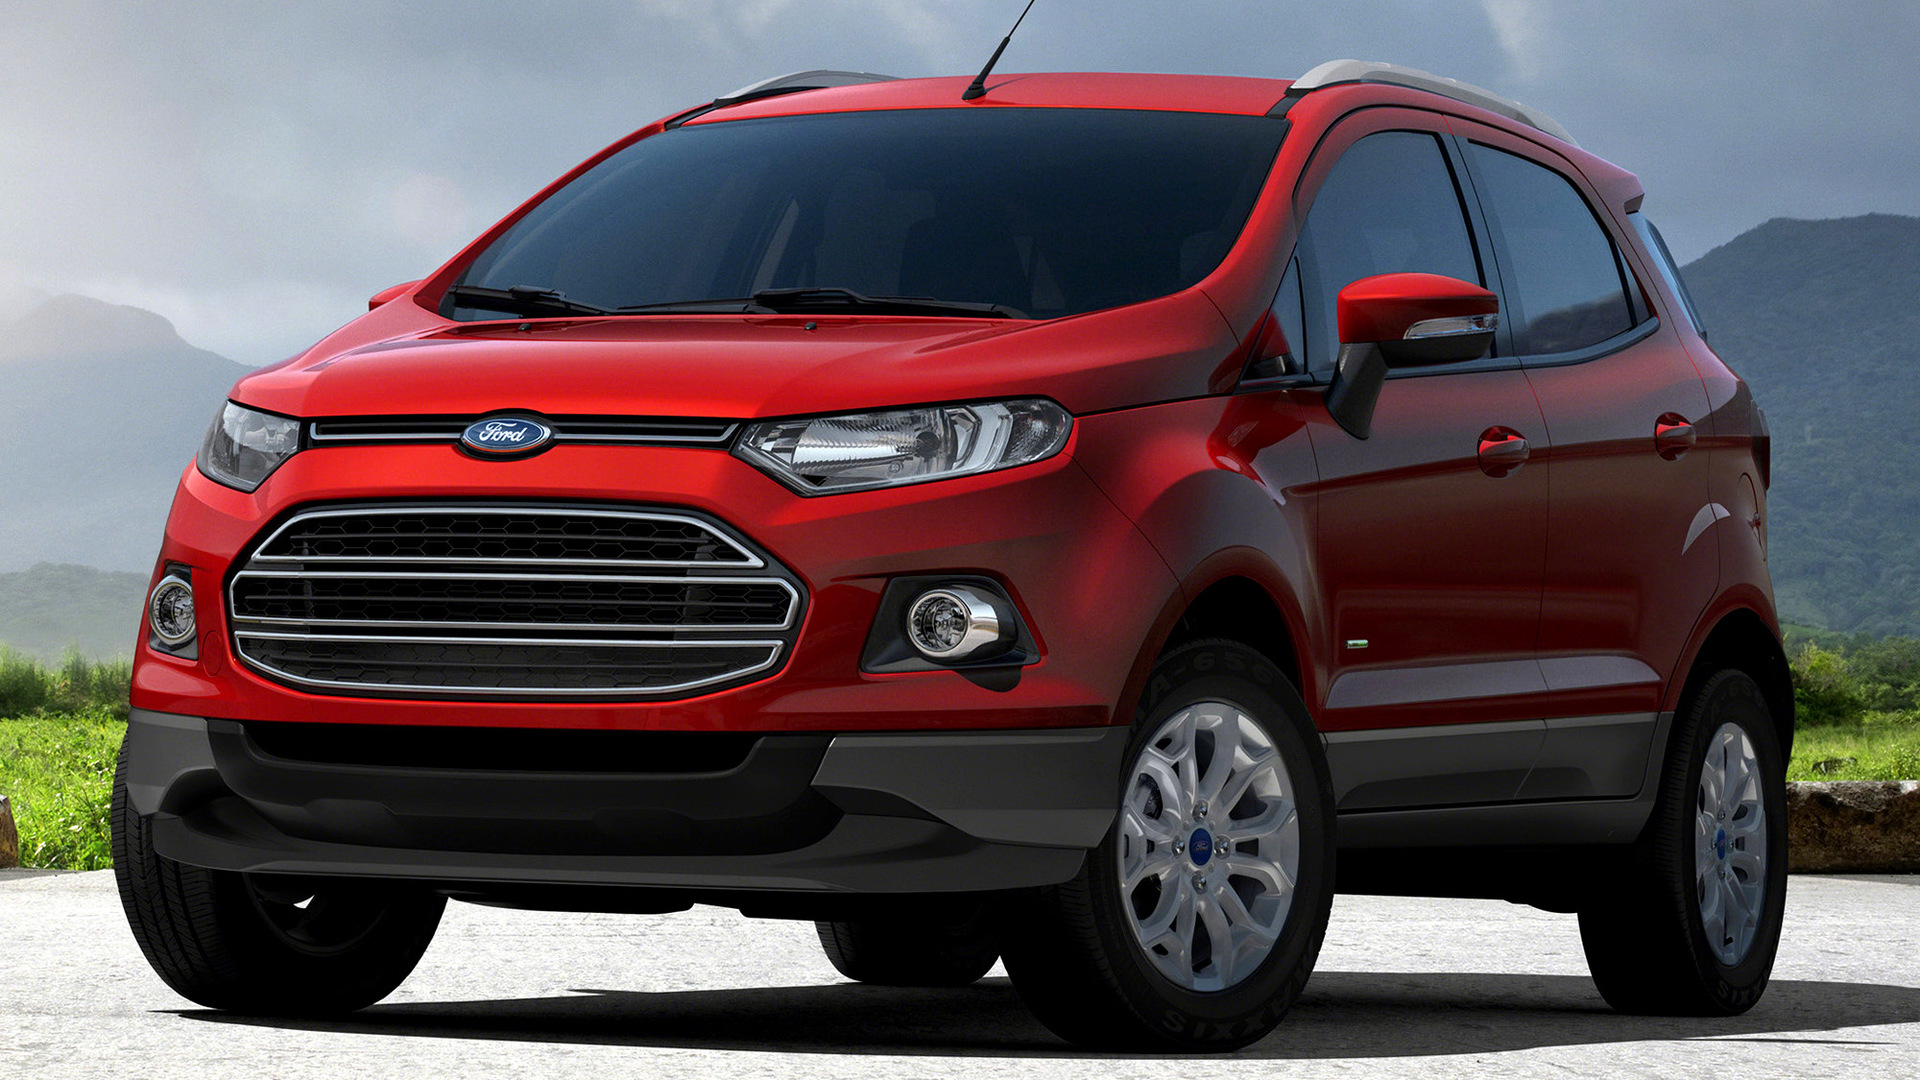 vehicles, ford ecosport, car, crossover car, subcompact car, suv, ford